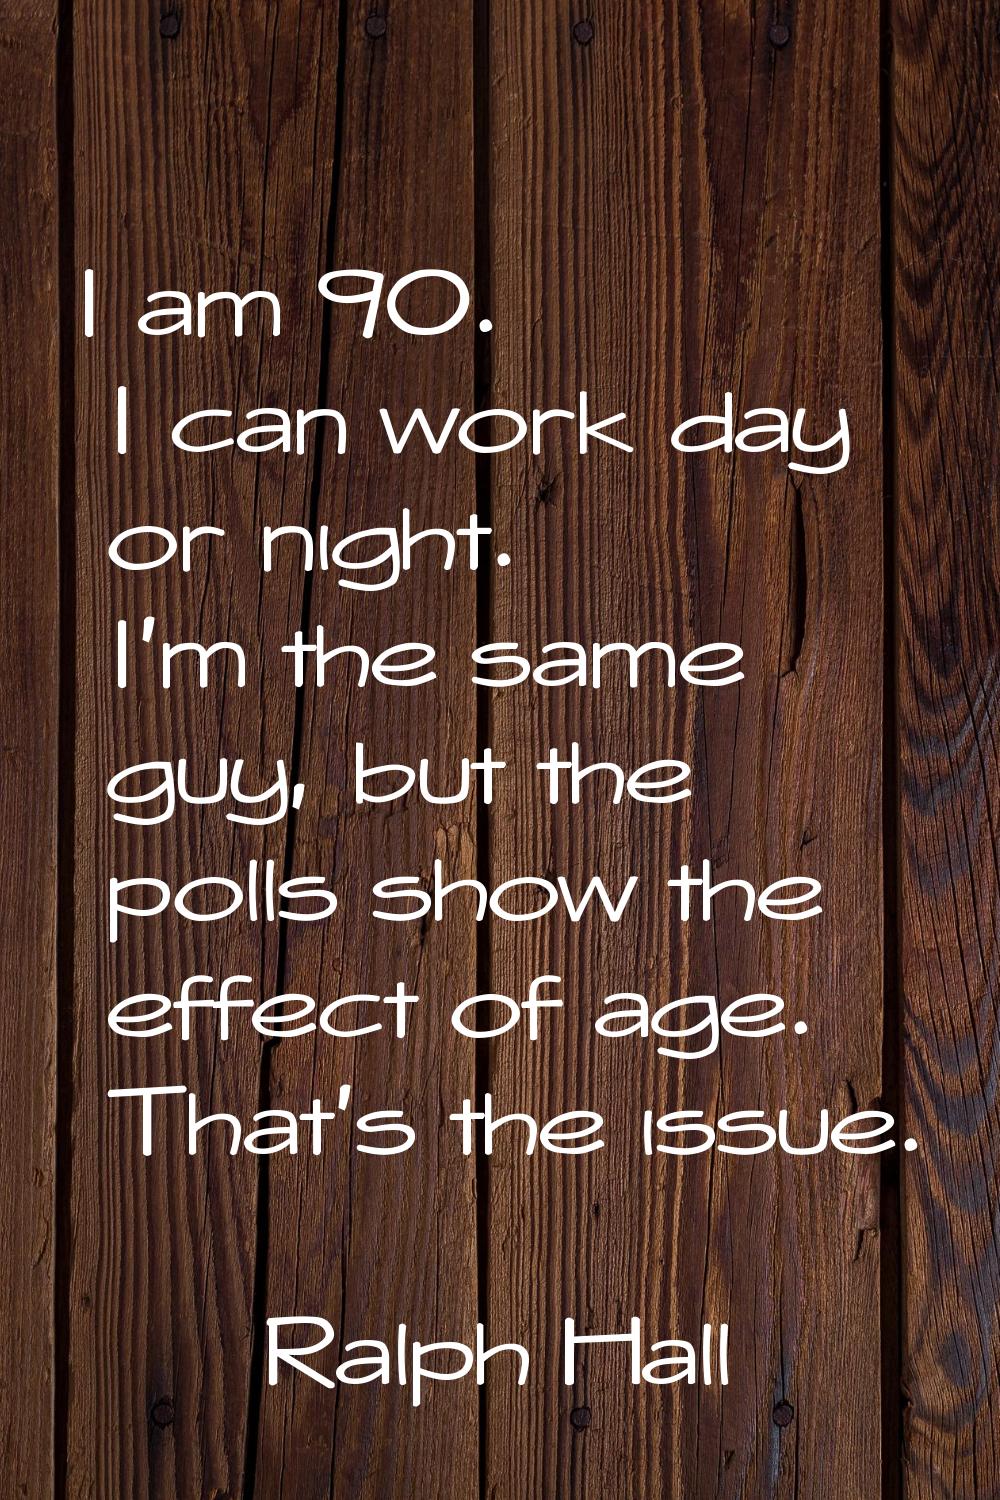 I am 90. I can work day or night. I'm the same guy, but the polls show the effect of age. That's th